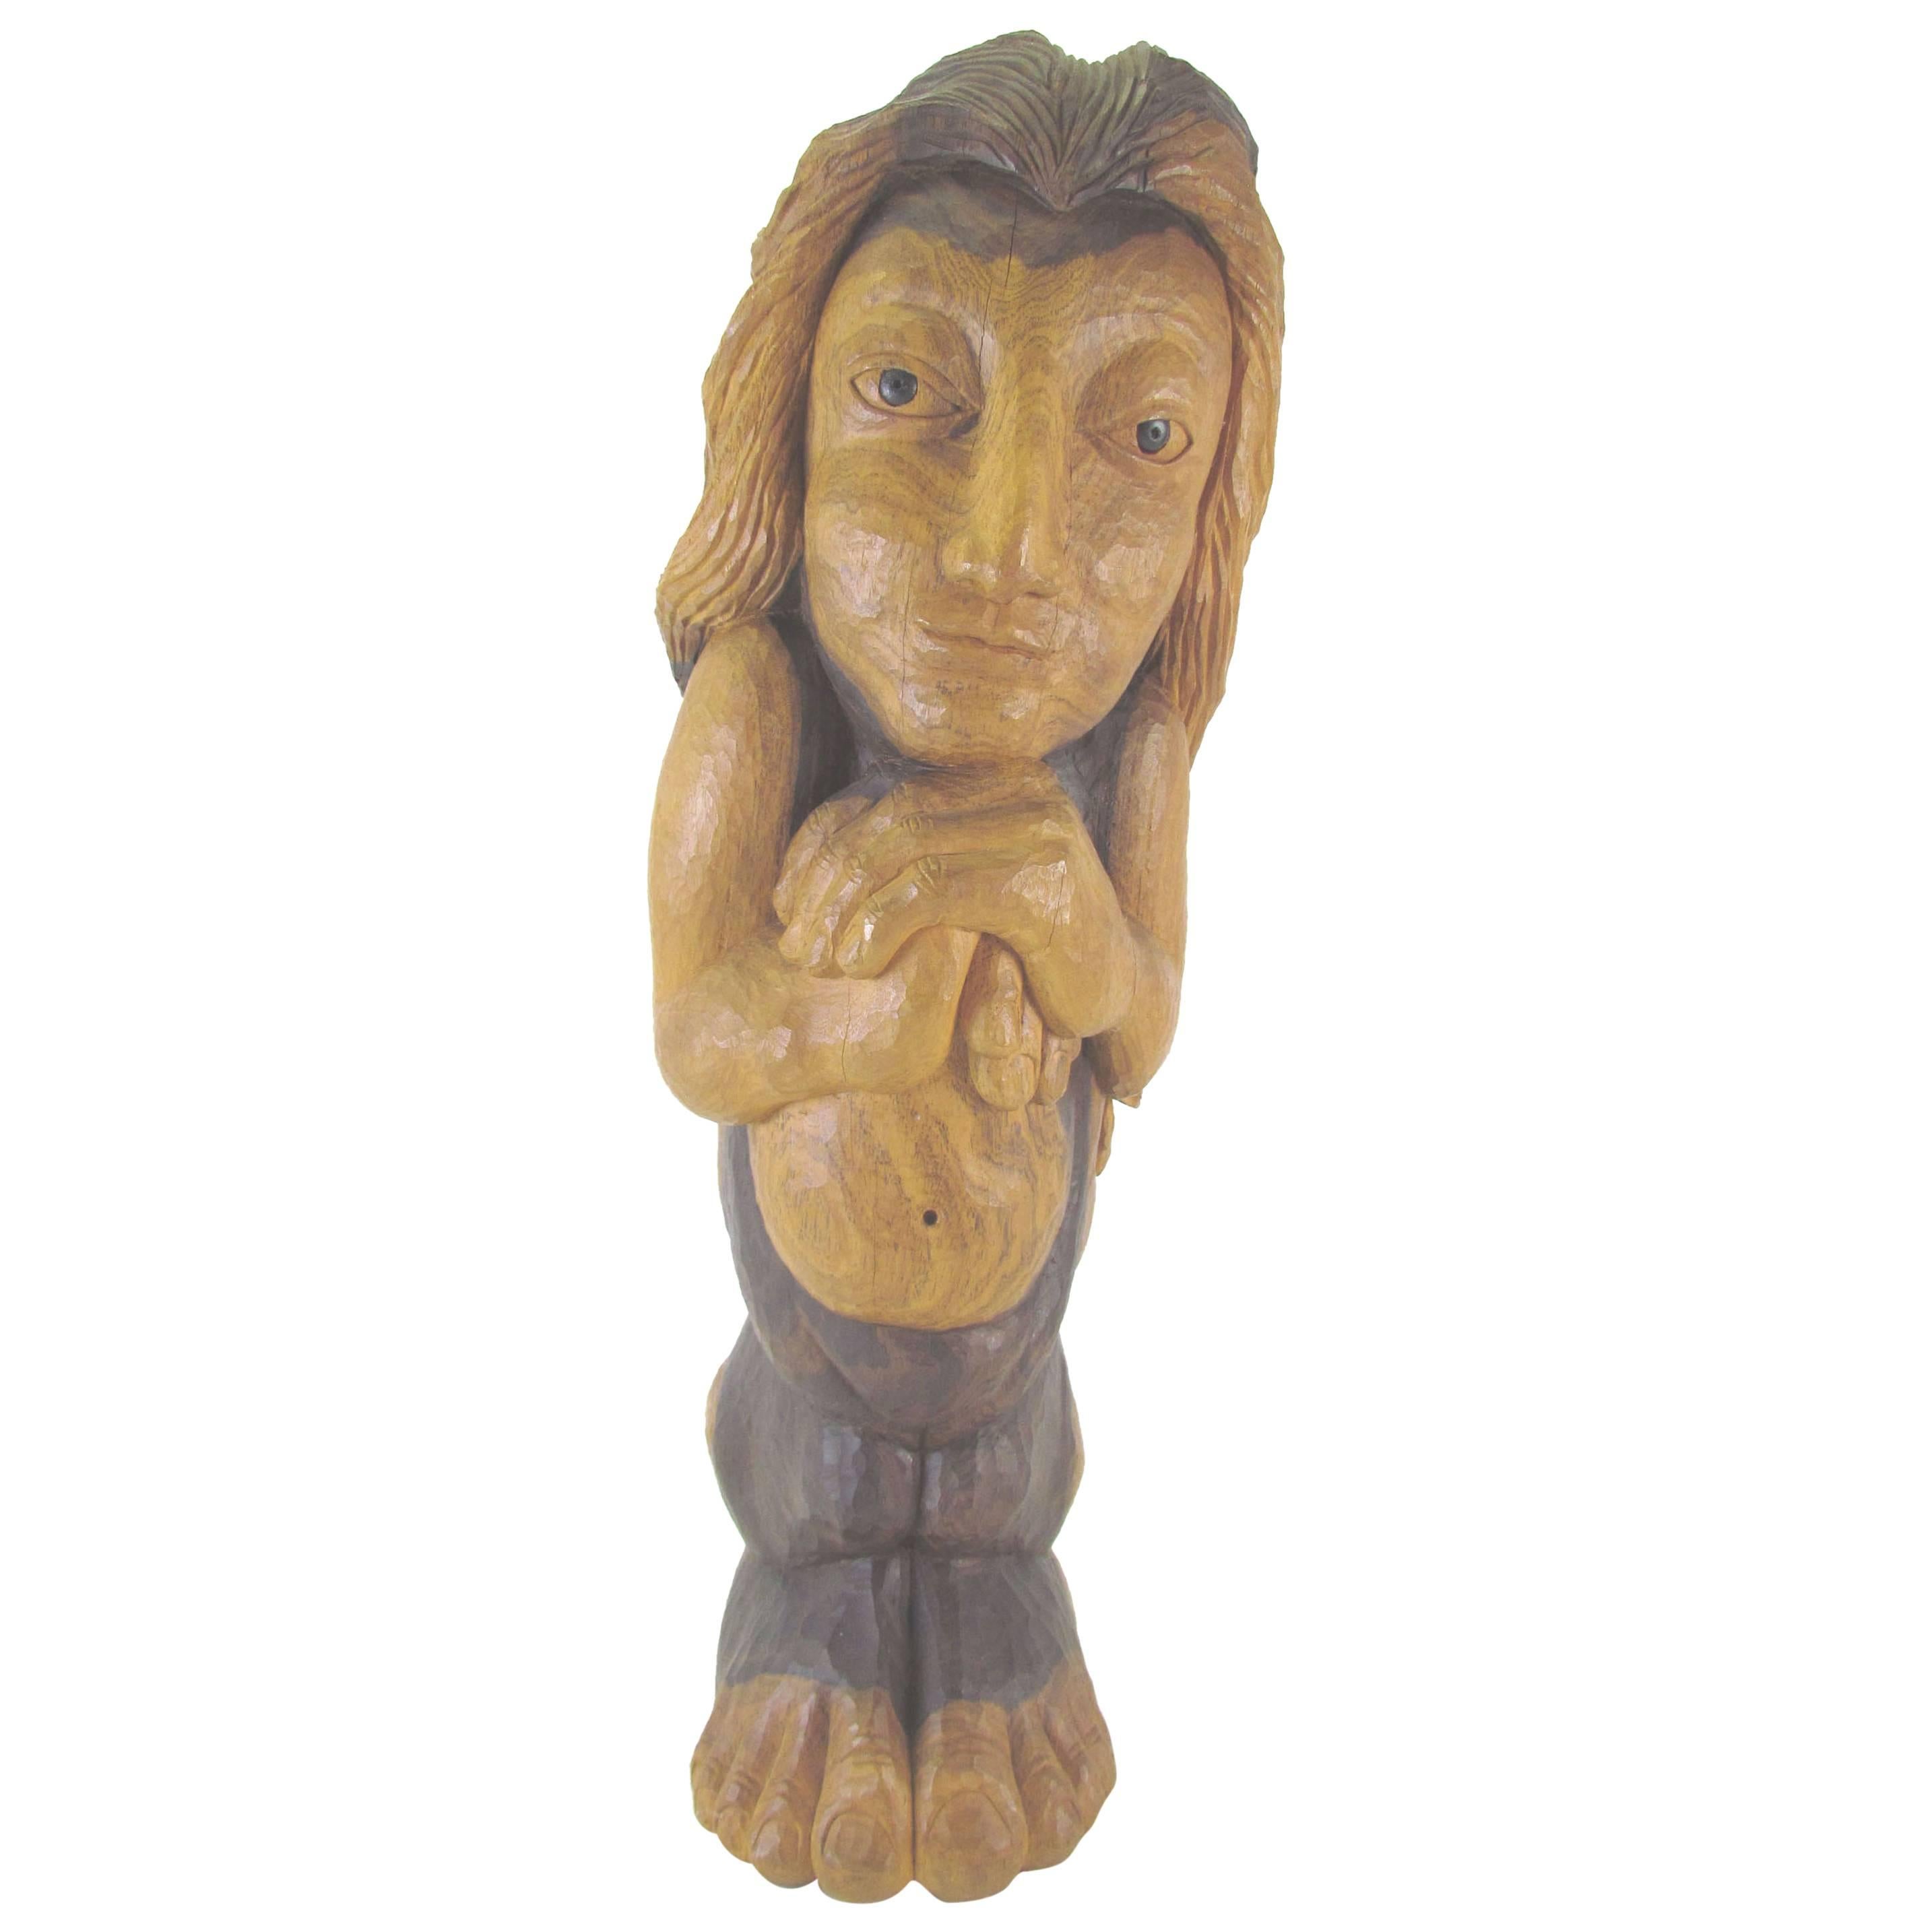 Carved Wood Mid-Century Sculpture Titled “Miss Num” by Diane Derrick For Sale